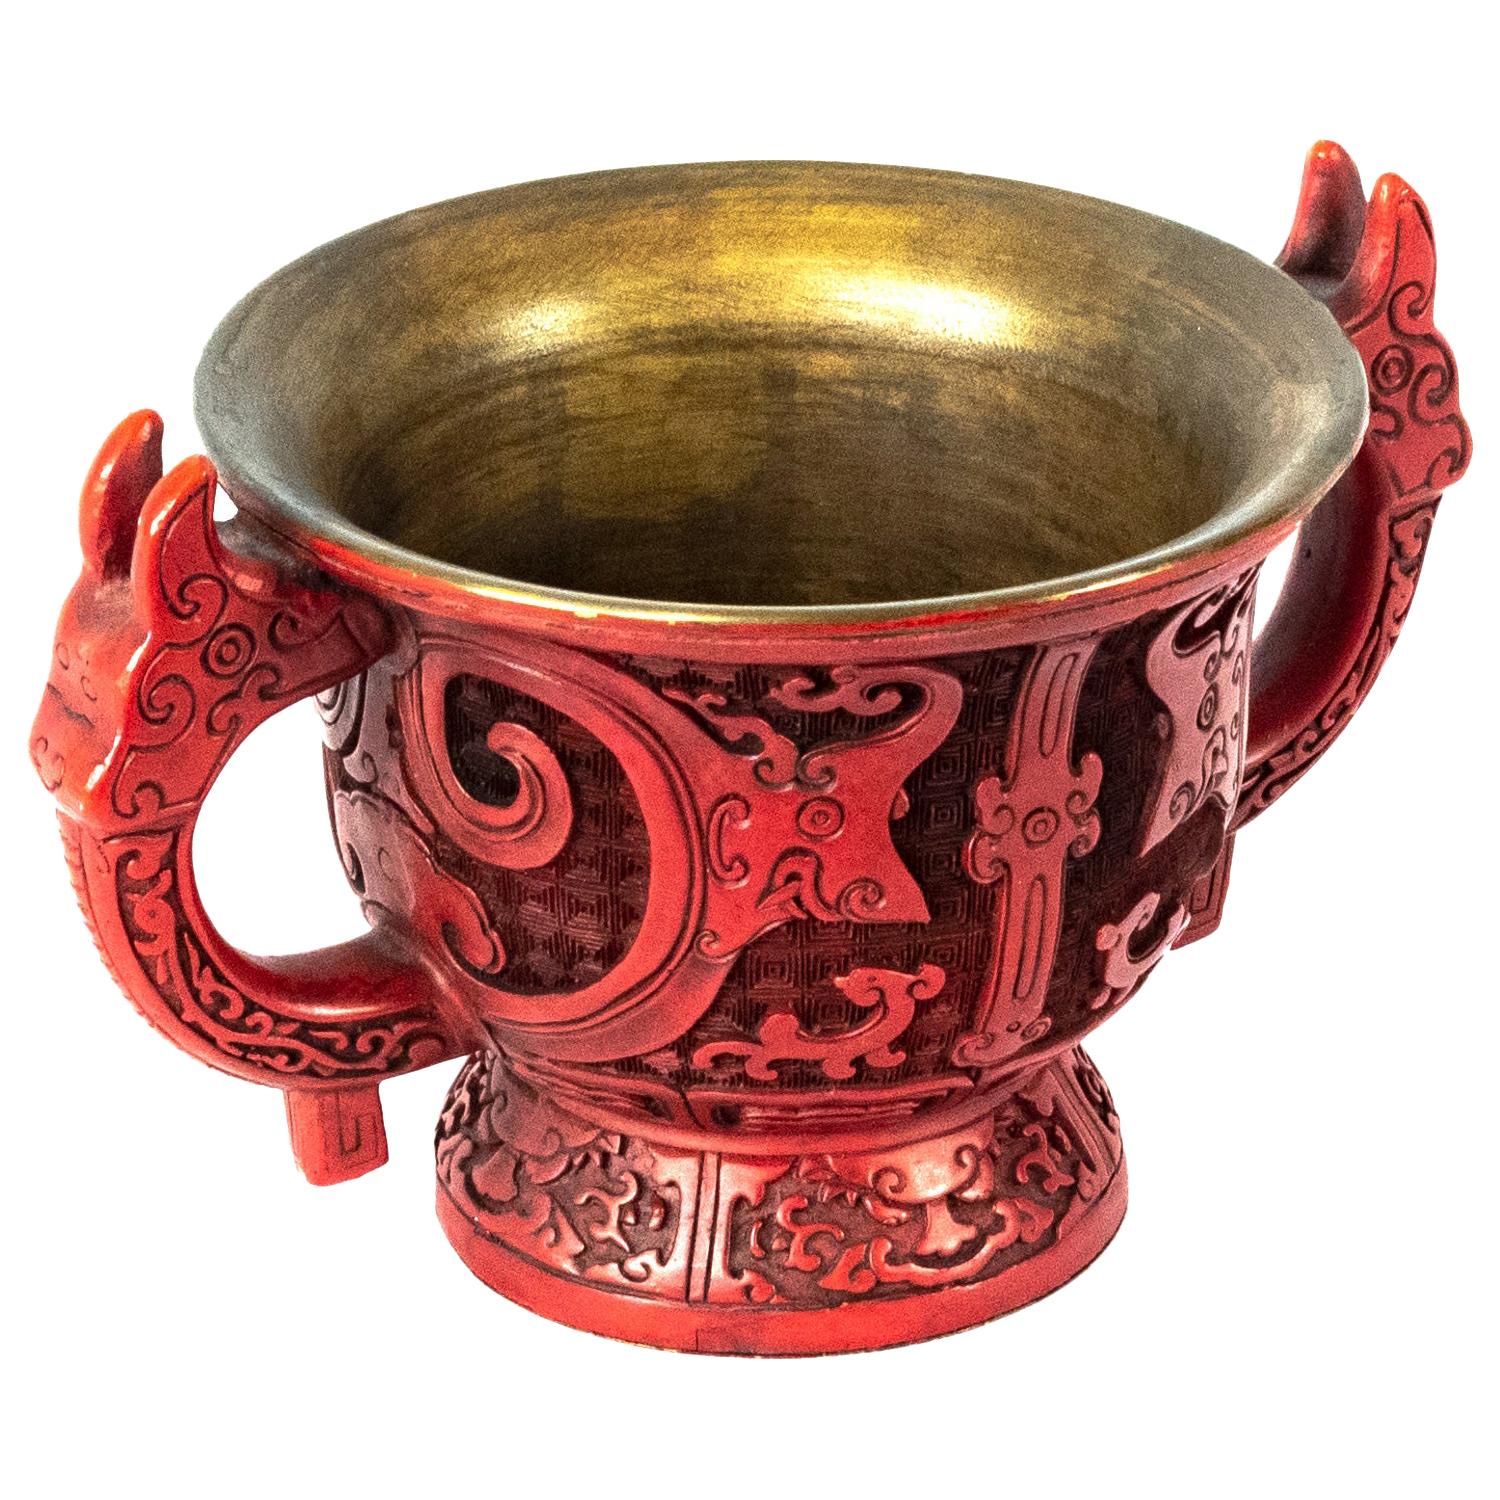 Chinese Gui-Form Cinnabar Lacquer Libation Cup, Qing Dynasty